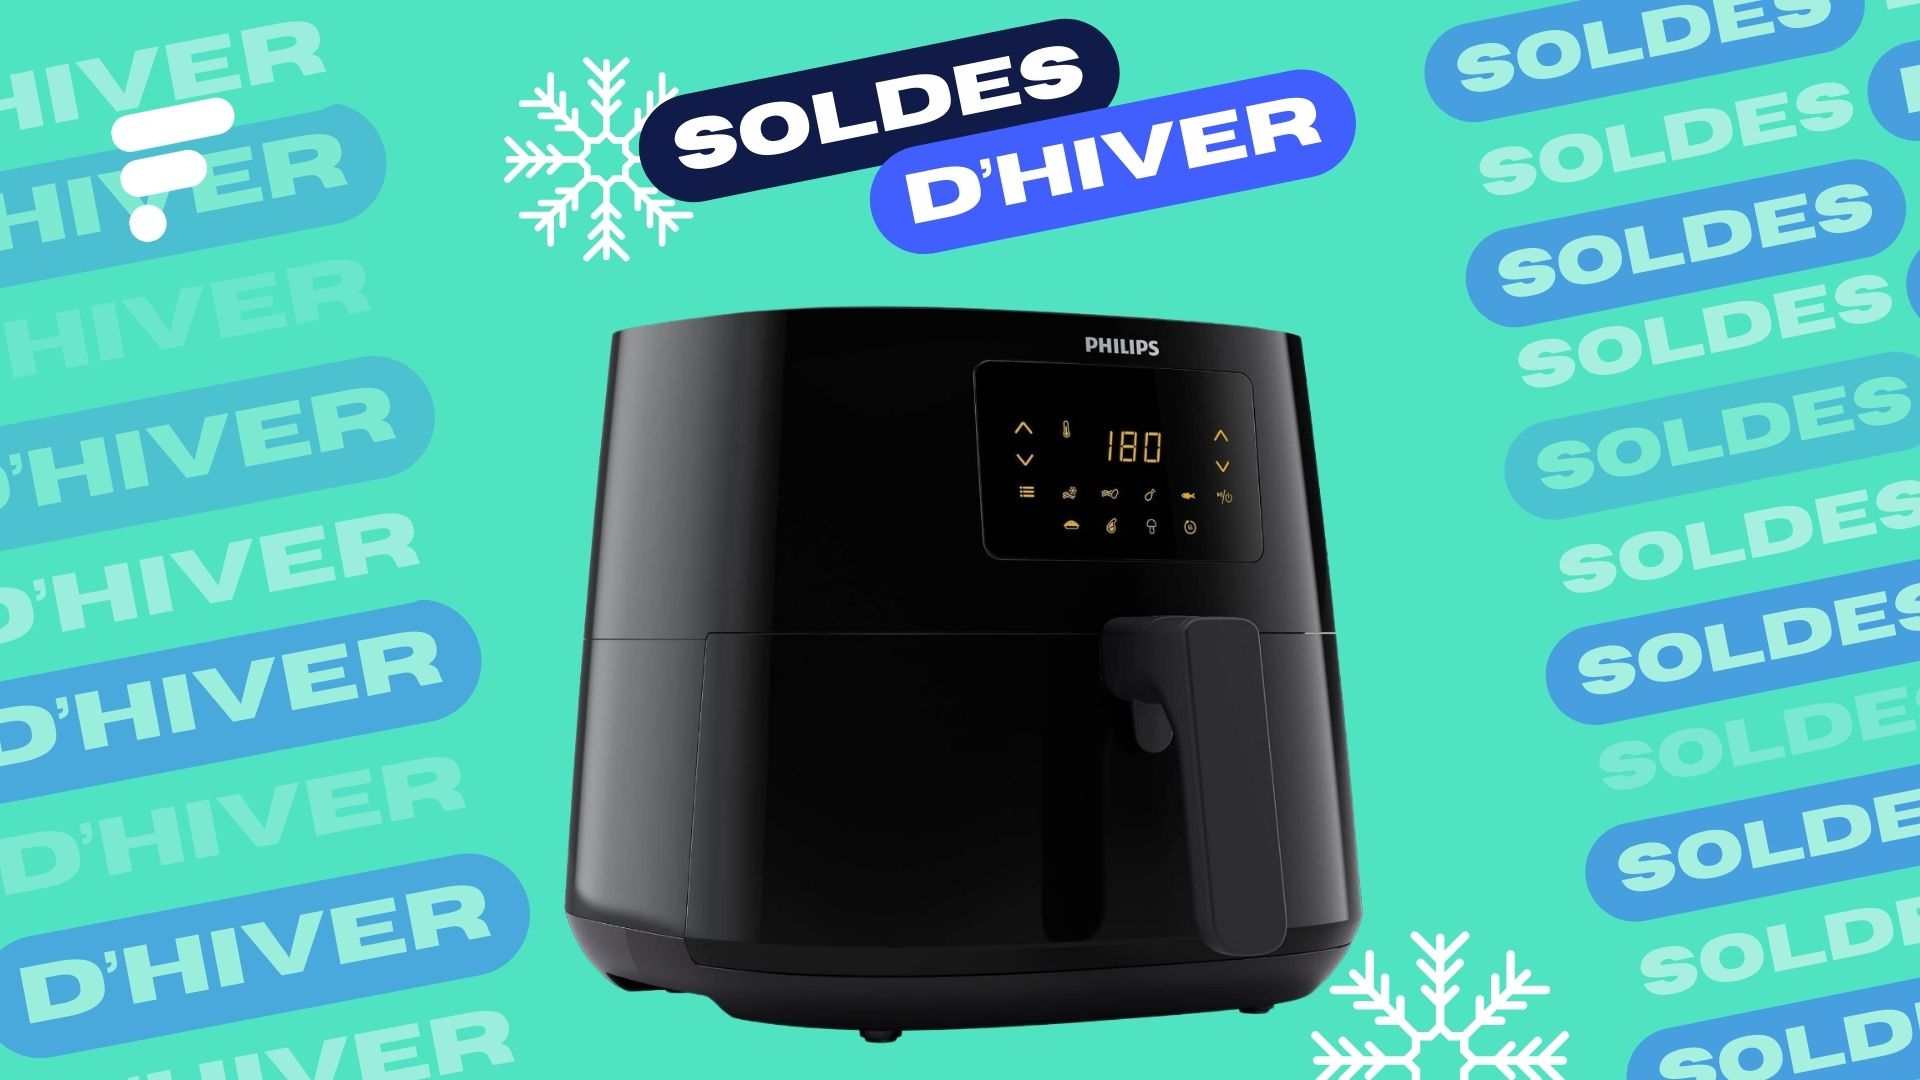 Thanks to the sales, this Philips XL Air Fryer at -50% is much more  affordable - Gearrice